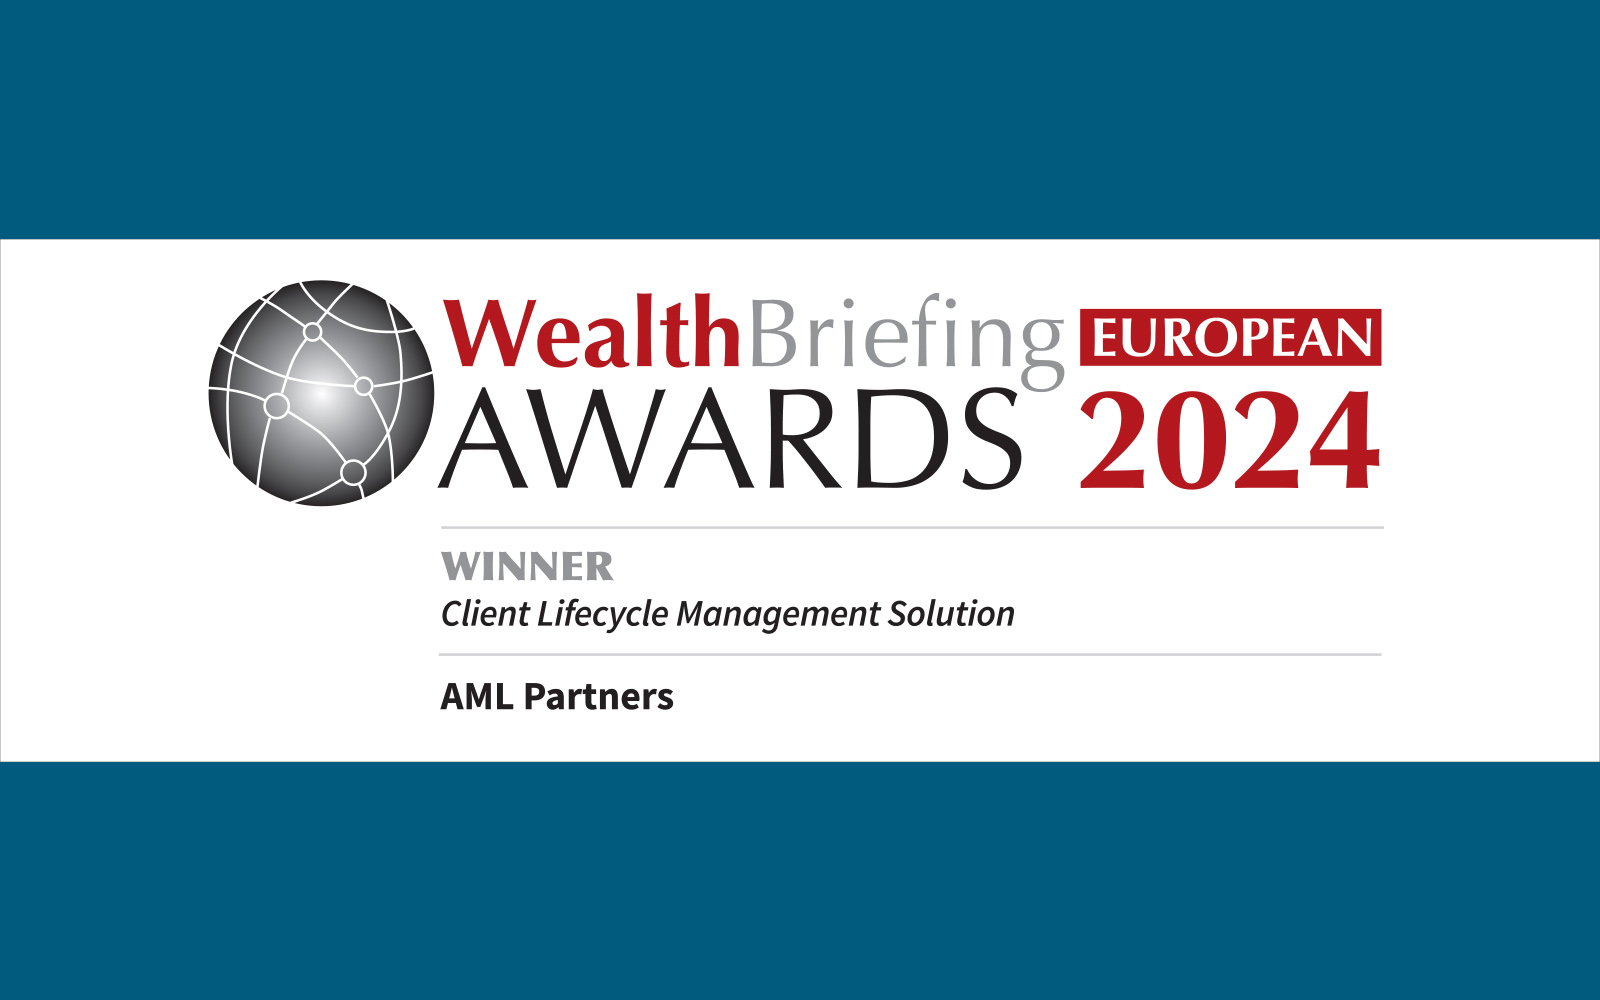 AML Partners wins award for Client Lifecycle Management for financial institutions. Art is the awards information on a blue background: "WealthBriefing European Awards 2024"